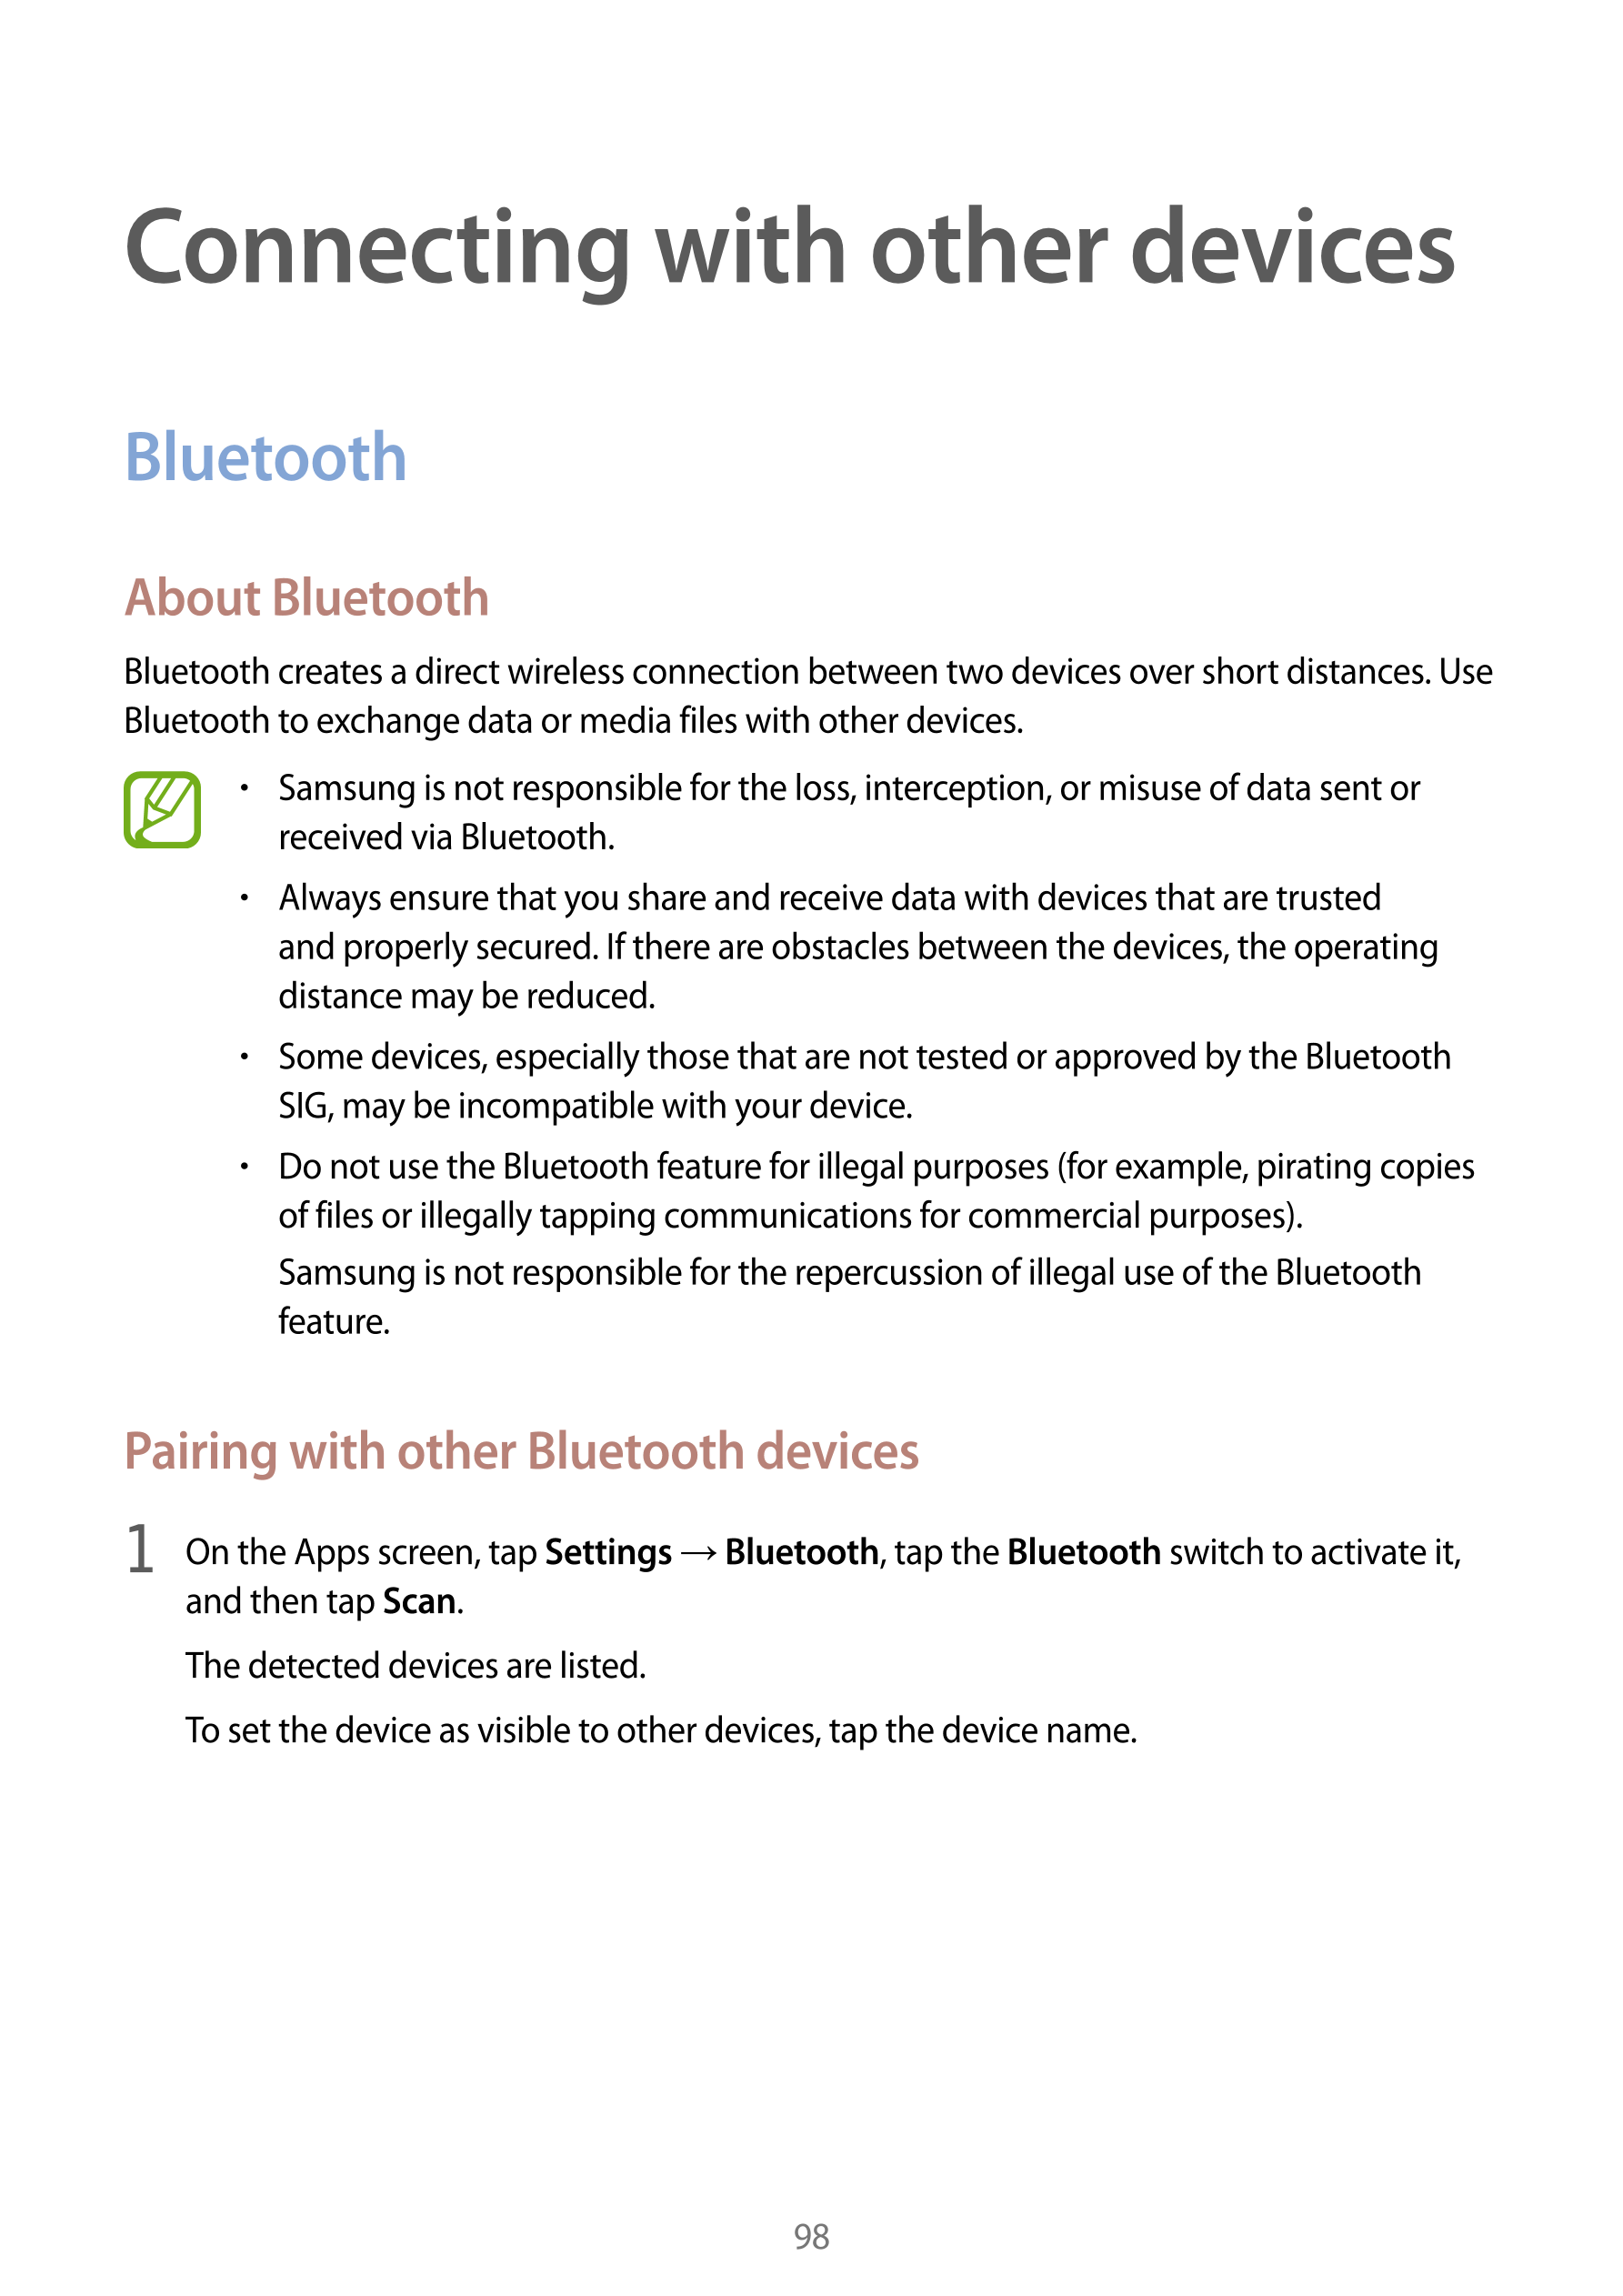 Connecting with other devices
Bluetooth
About Bluetooth
Bluetooth creates a direct wireless connection between two devices over 